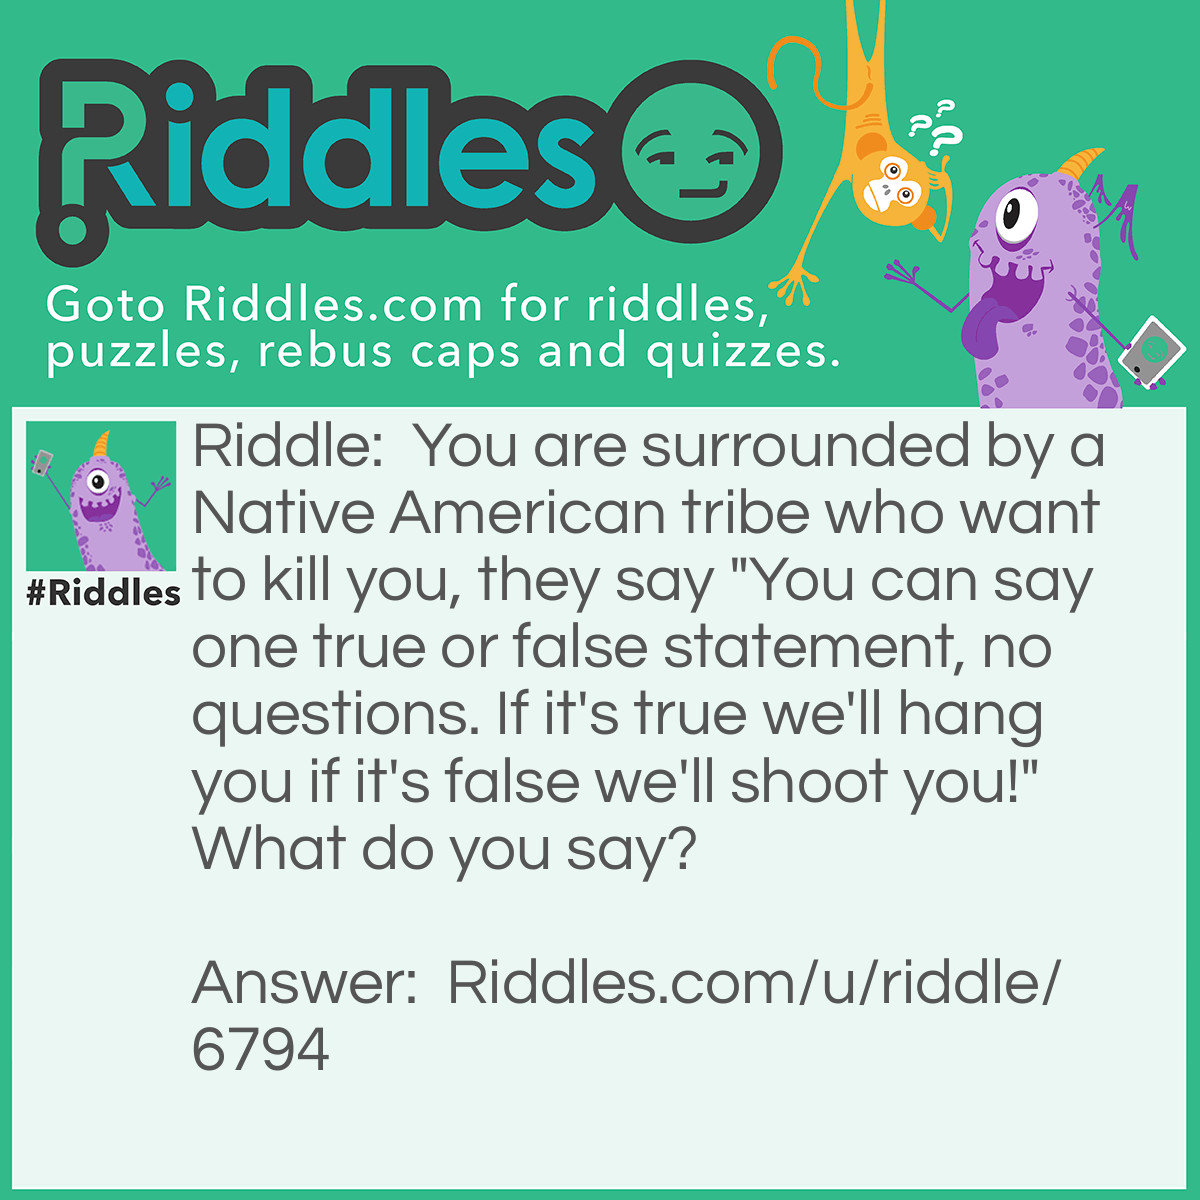 Riddle: You are surrounded by a Native American tribe who want to kill you, they say "You can say one true or false statement, no questions. If it's true we'll hang you if it's false we'll shoot you!" What do you say? Answer: You will shoot me. because if they will shoot you your statement would be true, but if they hang you then your statement would be false so they would have to shoot you, so it loops around in a circle and they can't hurt you!